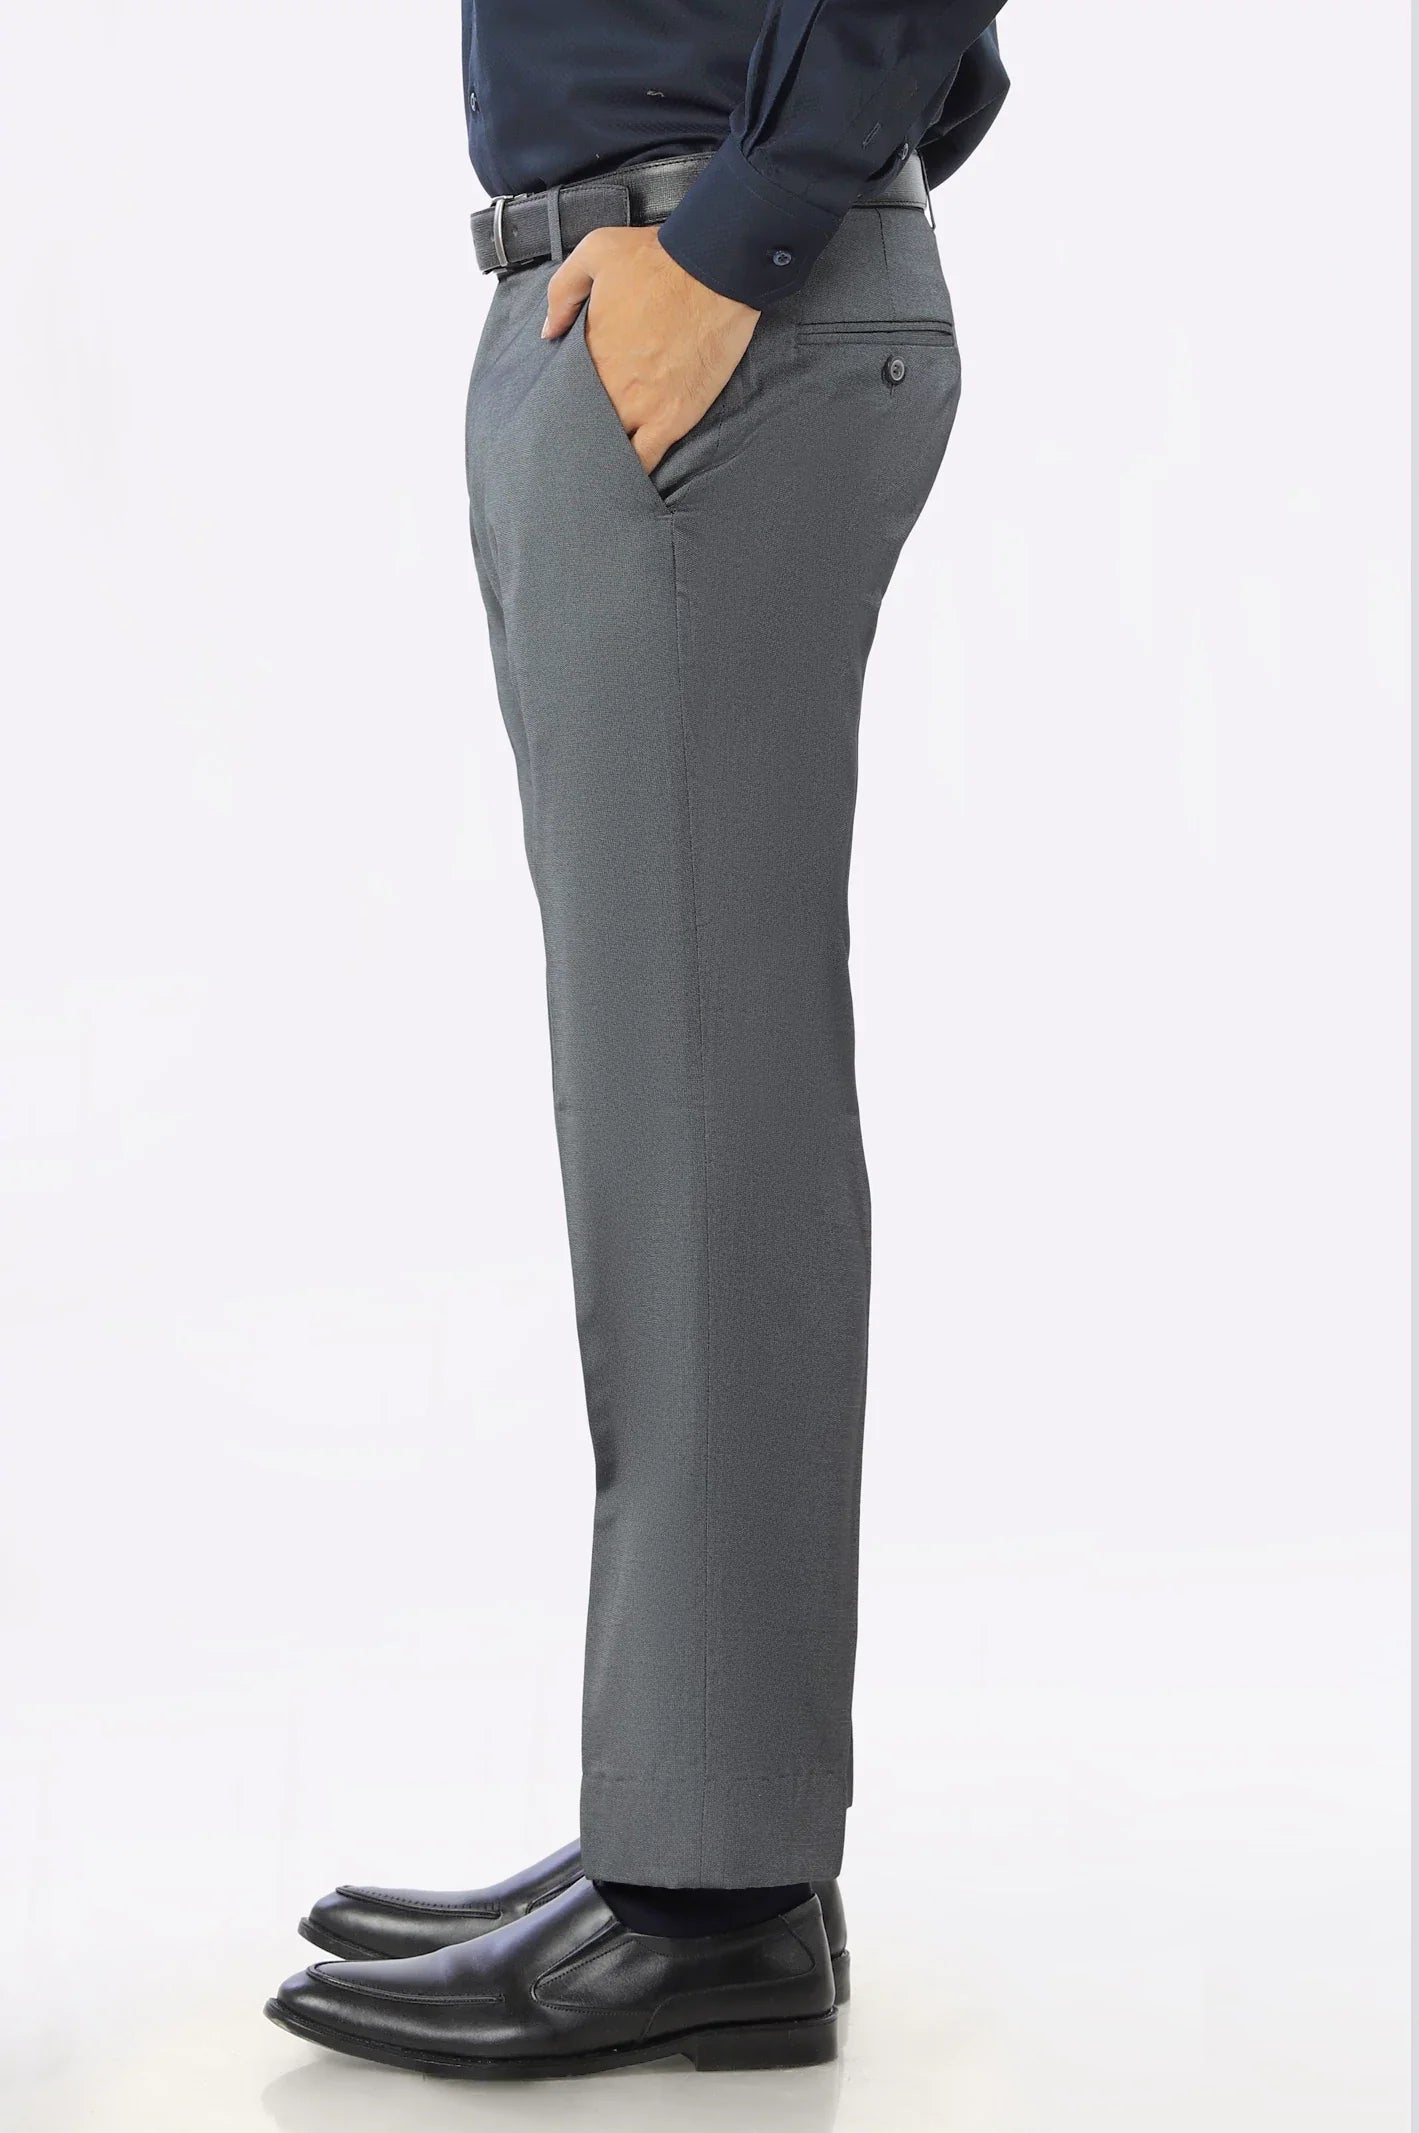 Luxury Smart Fit Formal Trouser From Diners